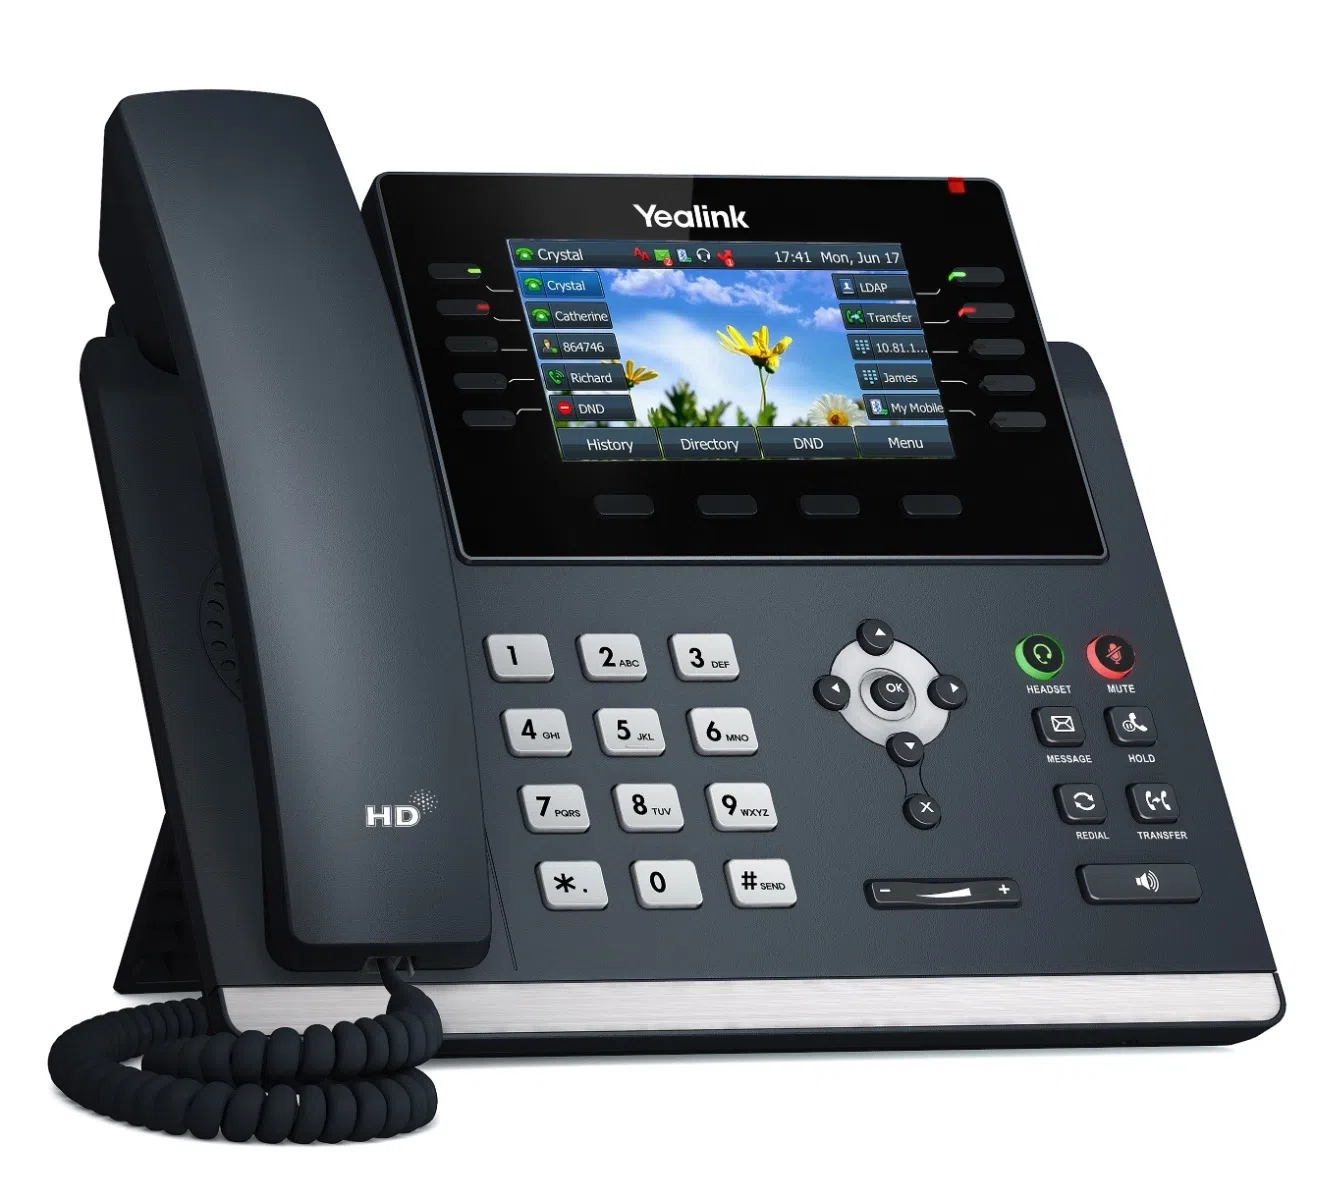 Does the Yealink SIP-T46U IP phone support the use of color-screen expansion modules?